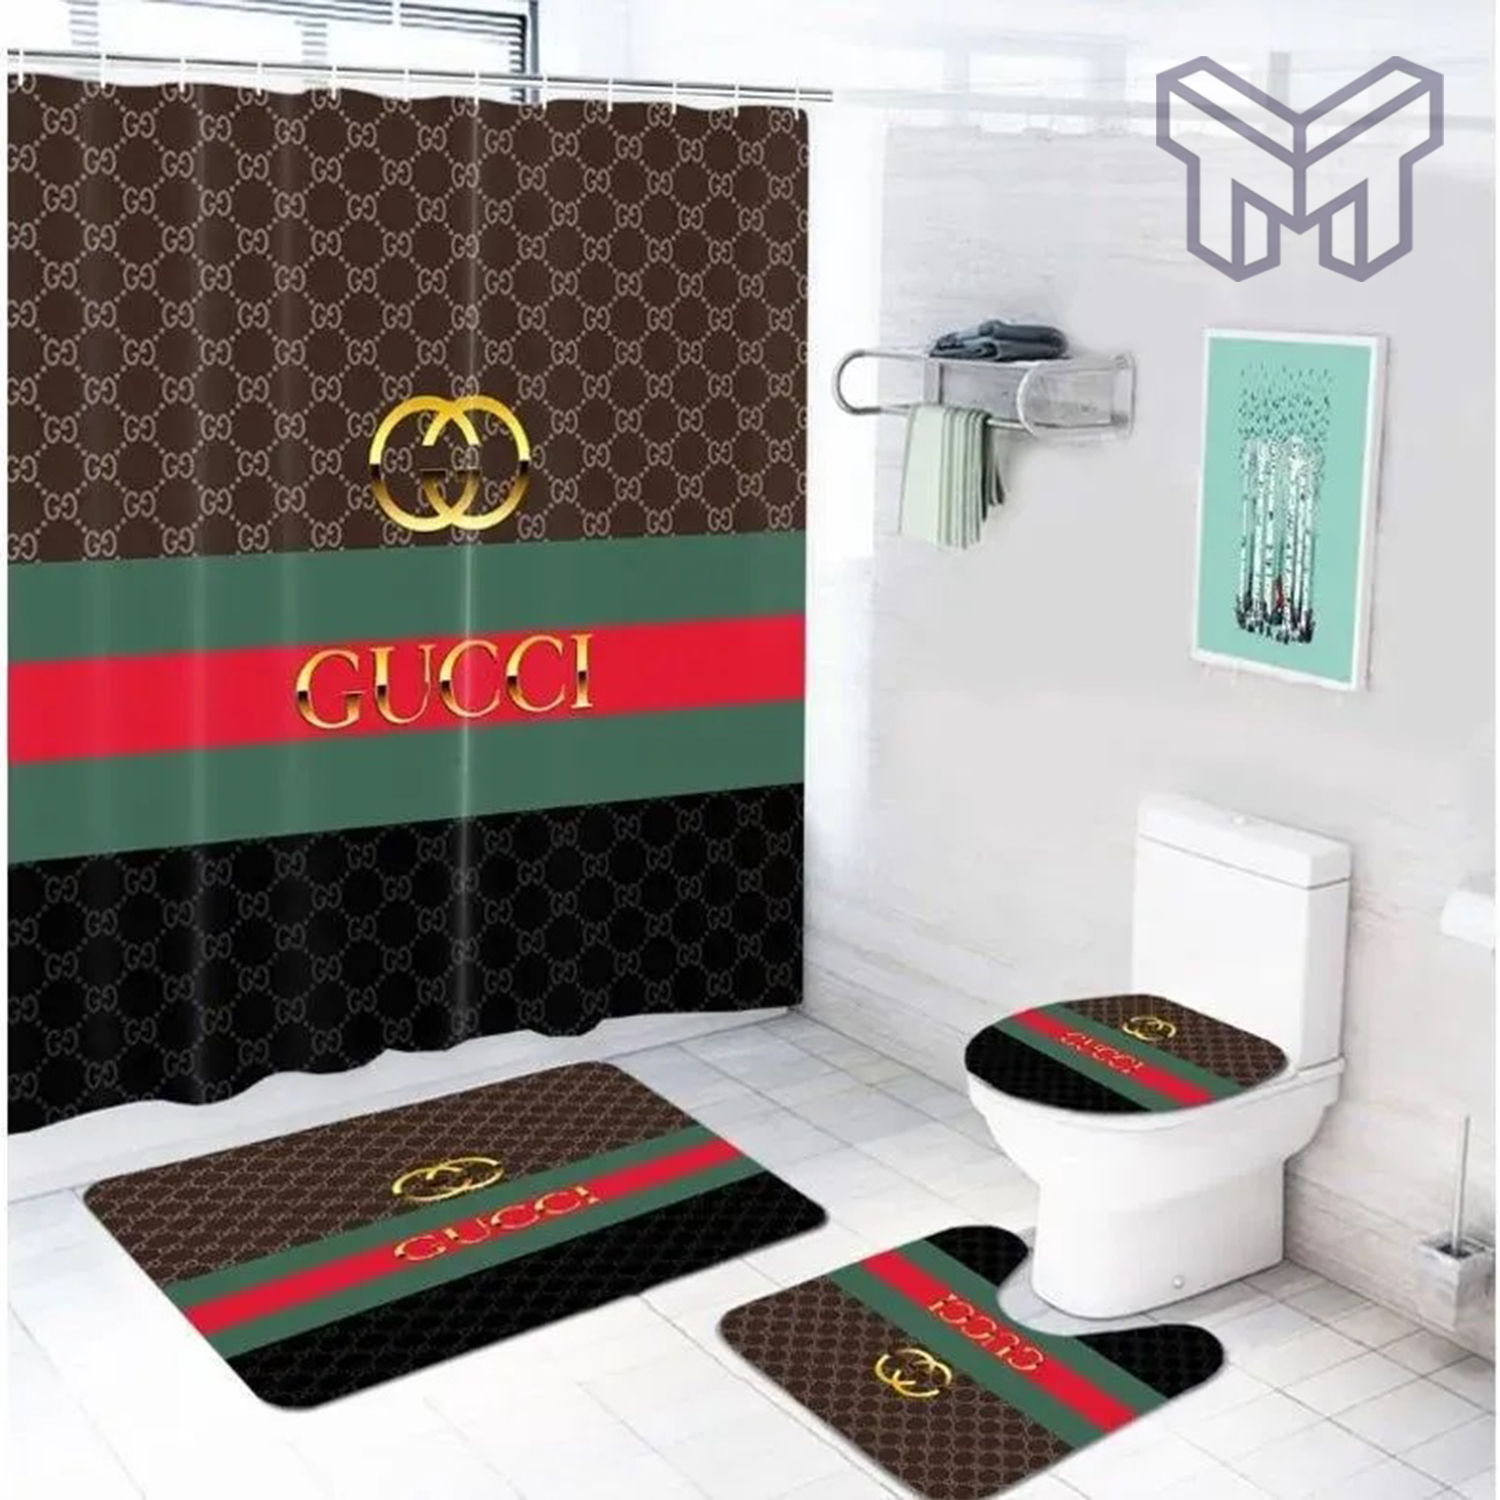 Louis Vuitton Fashion Logo Limited Luxury Brand Bathroom Set Home Decor 58  Shower Curtain And Rug Toilet Seat Lid Covers Bathroom Set - Muranotex Store